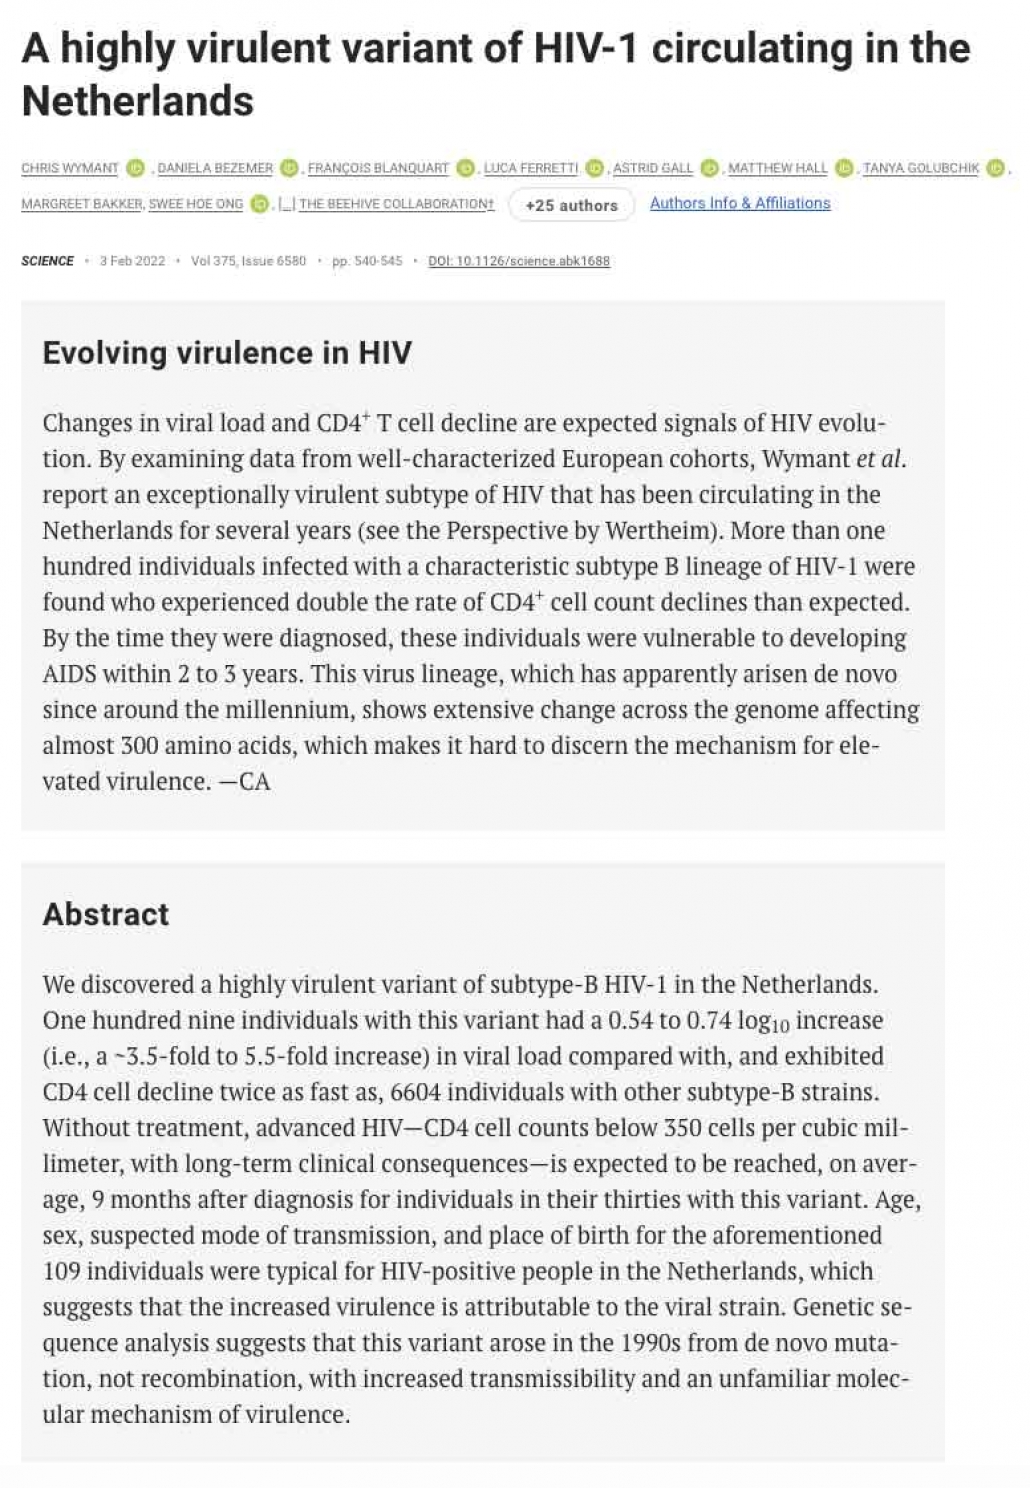 BC-CfE responds to the discovery of a highly virulent variant of subtype-B HIV-1